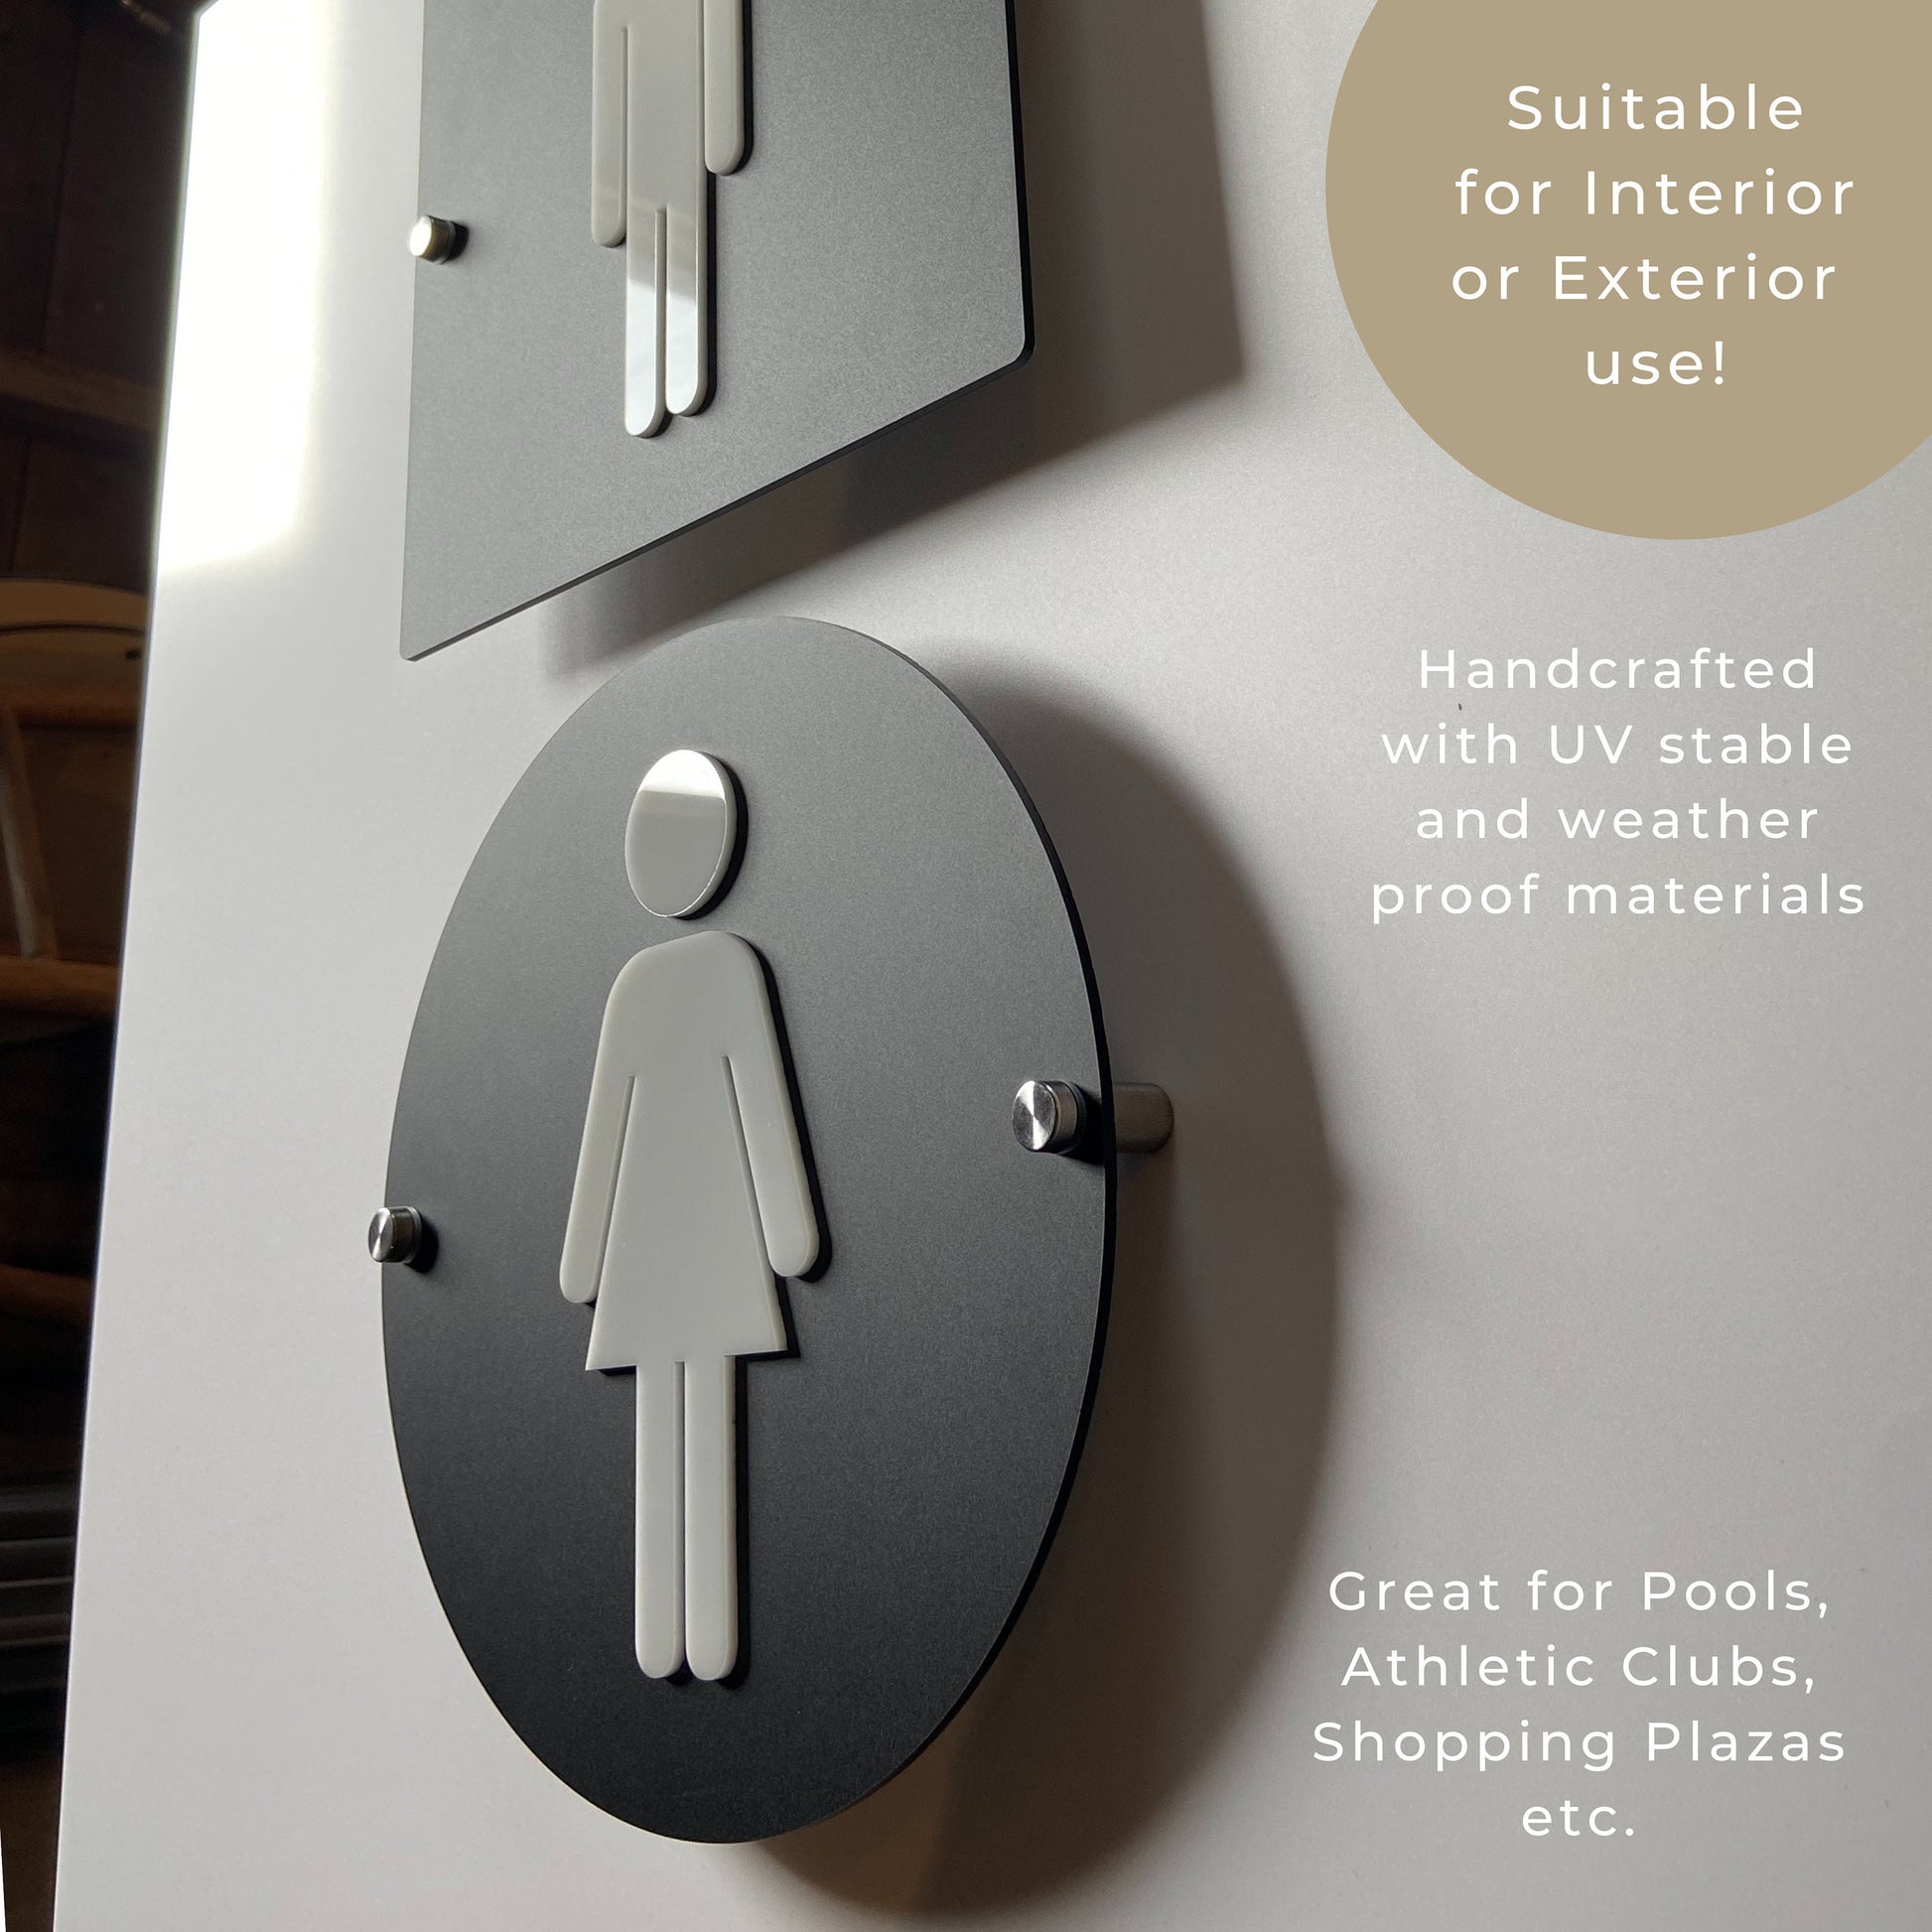 Outdoor/Indoor Restroom Signs | UV Stable Modern Acrylic Office Cafe Business Men Women Handicap Bathroom 9x9 "|Priced per sign not as a set